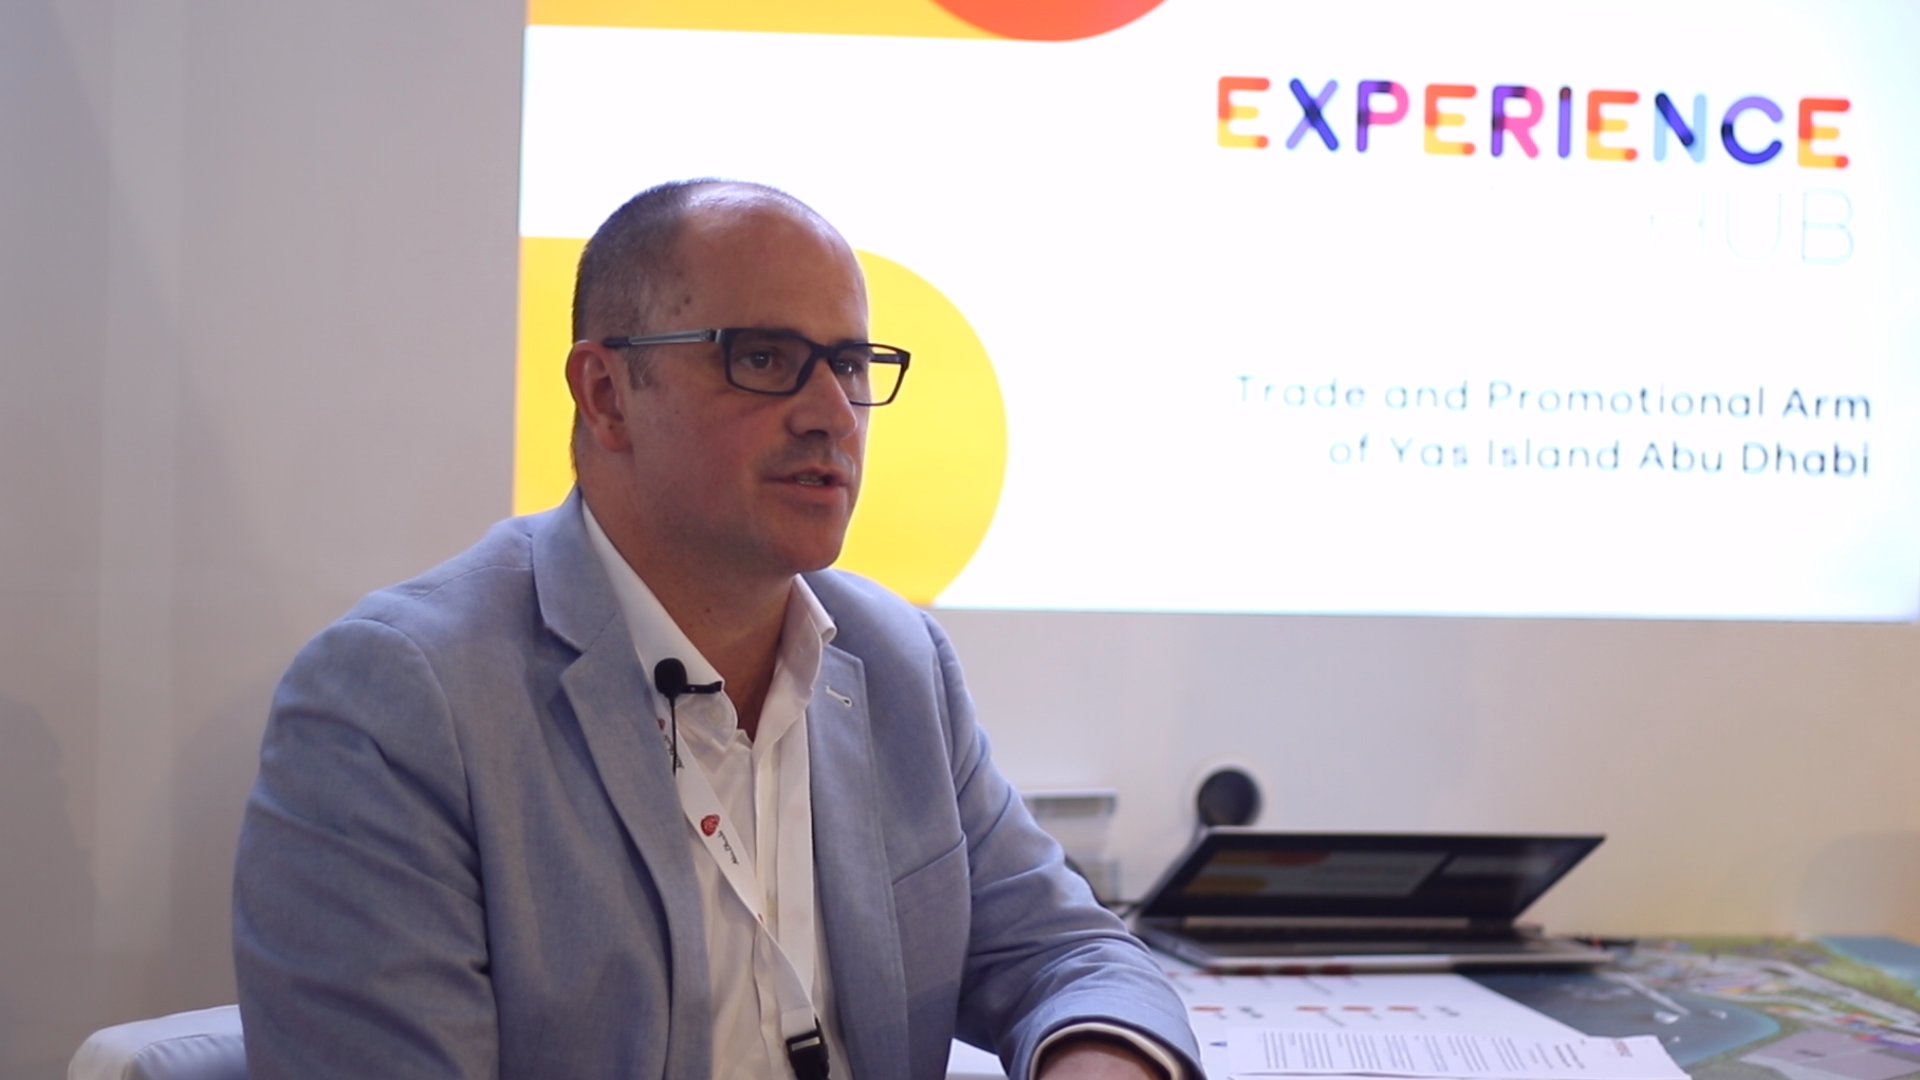 Interview with Liam Findlay, the general manager of Experience Hub